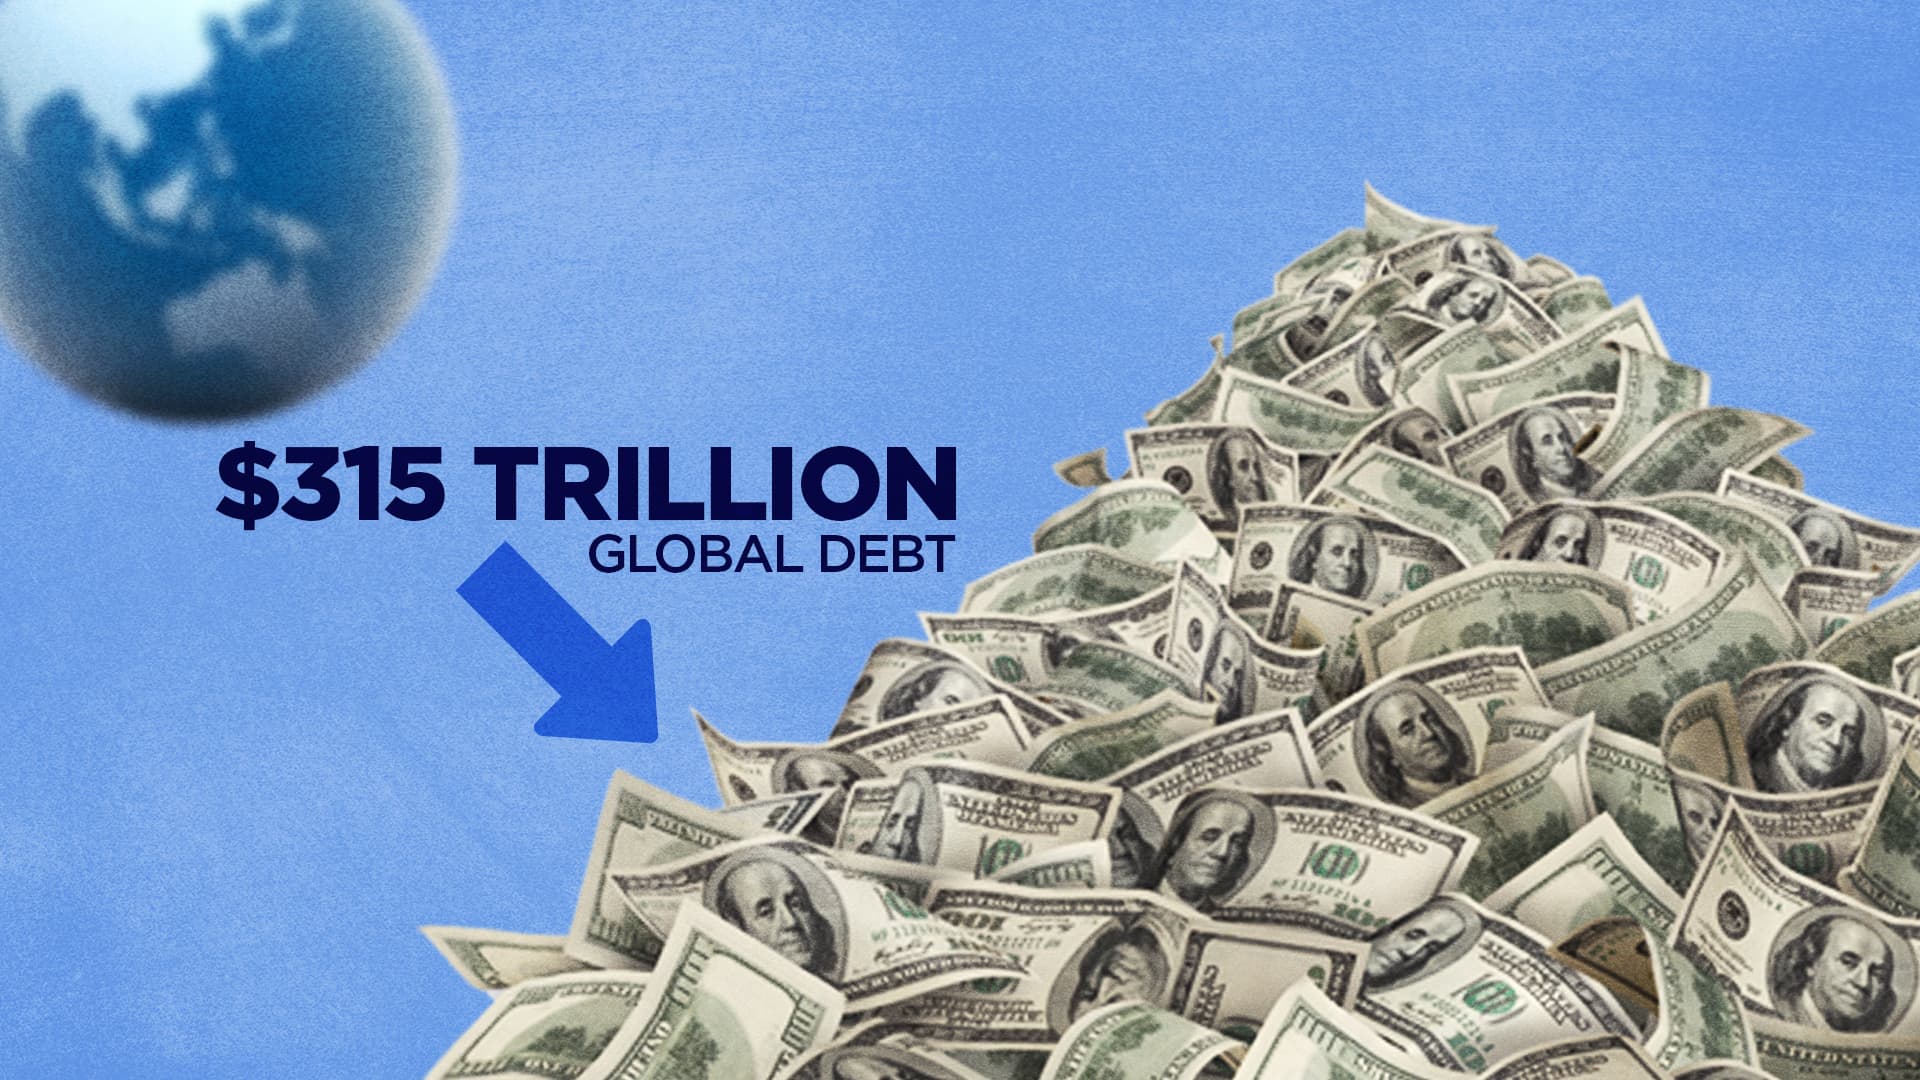 How the world got into $315 trillion of debt